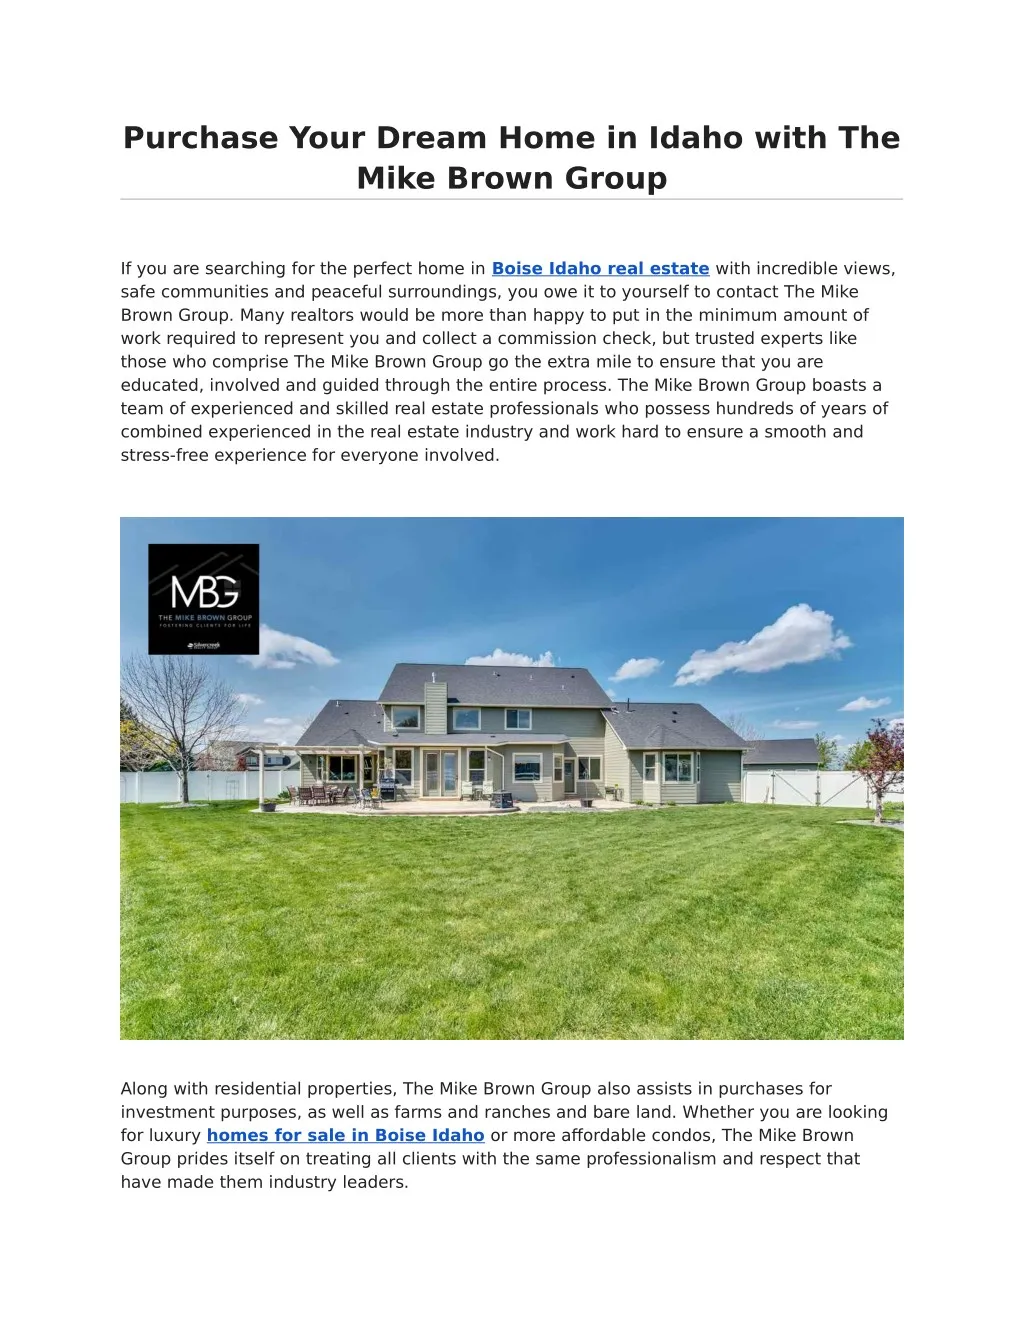 purchase your dream home in idaho with the mike